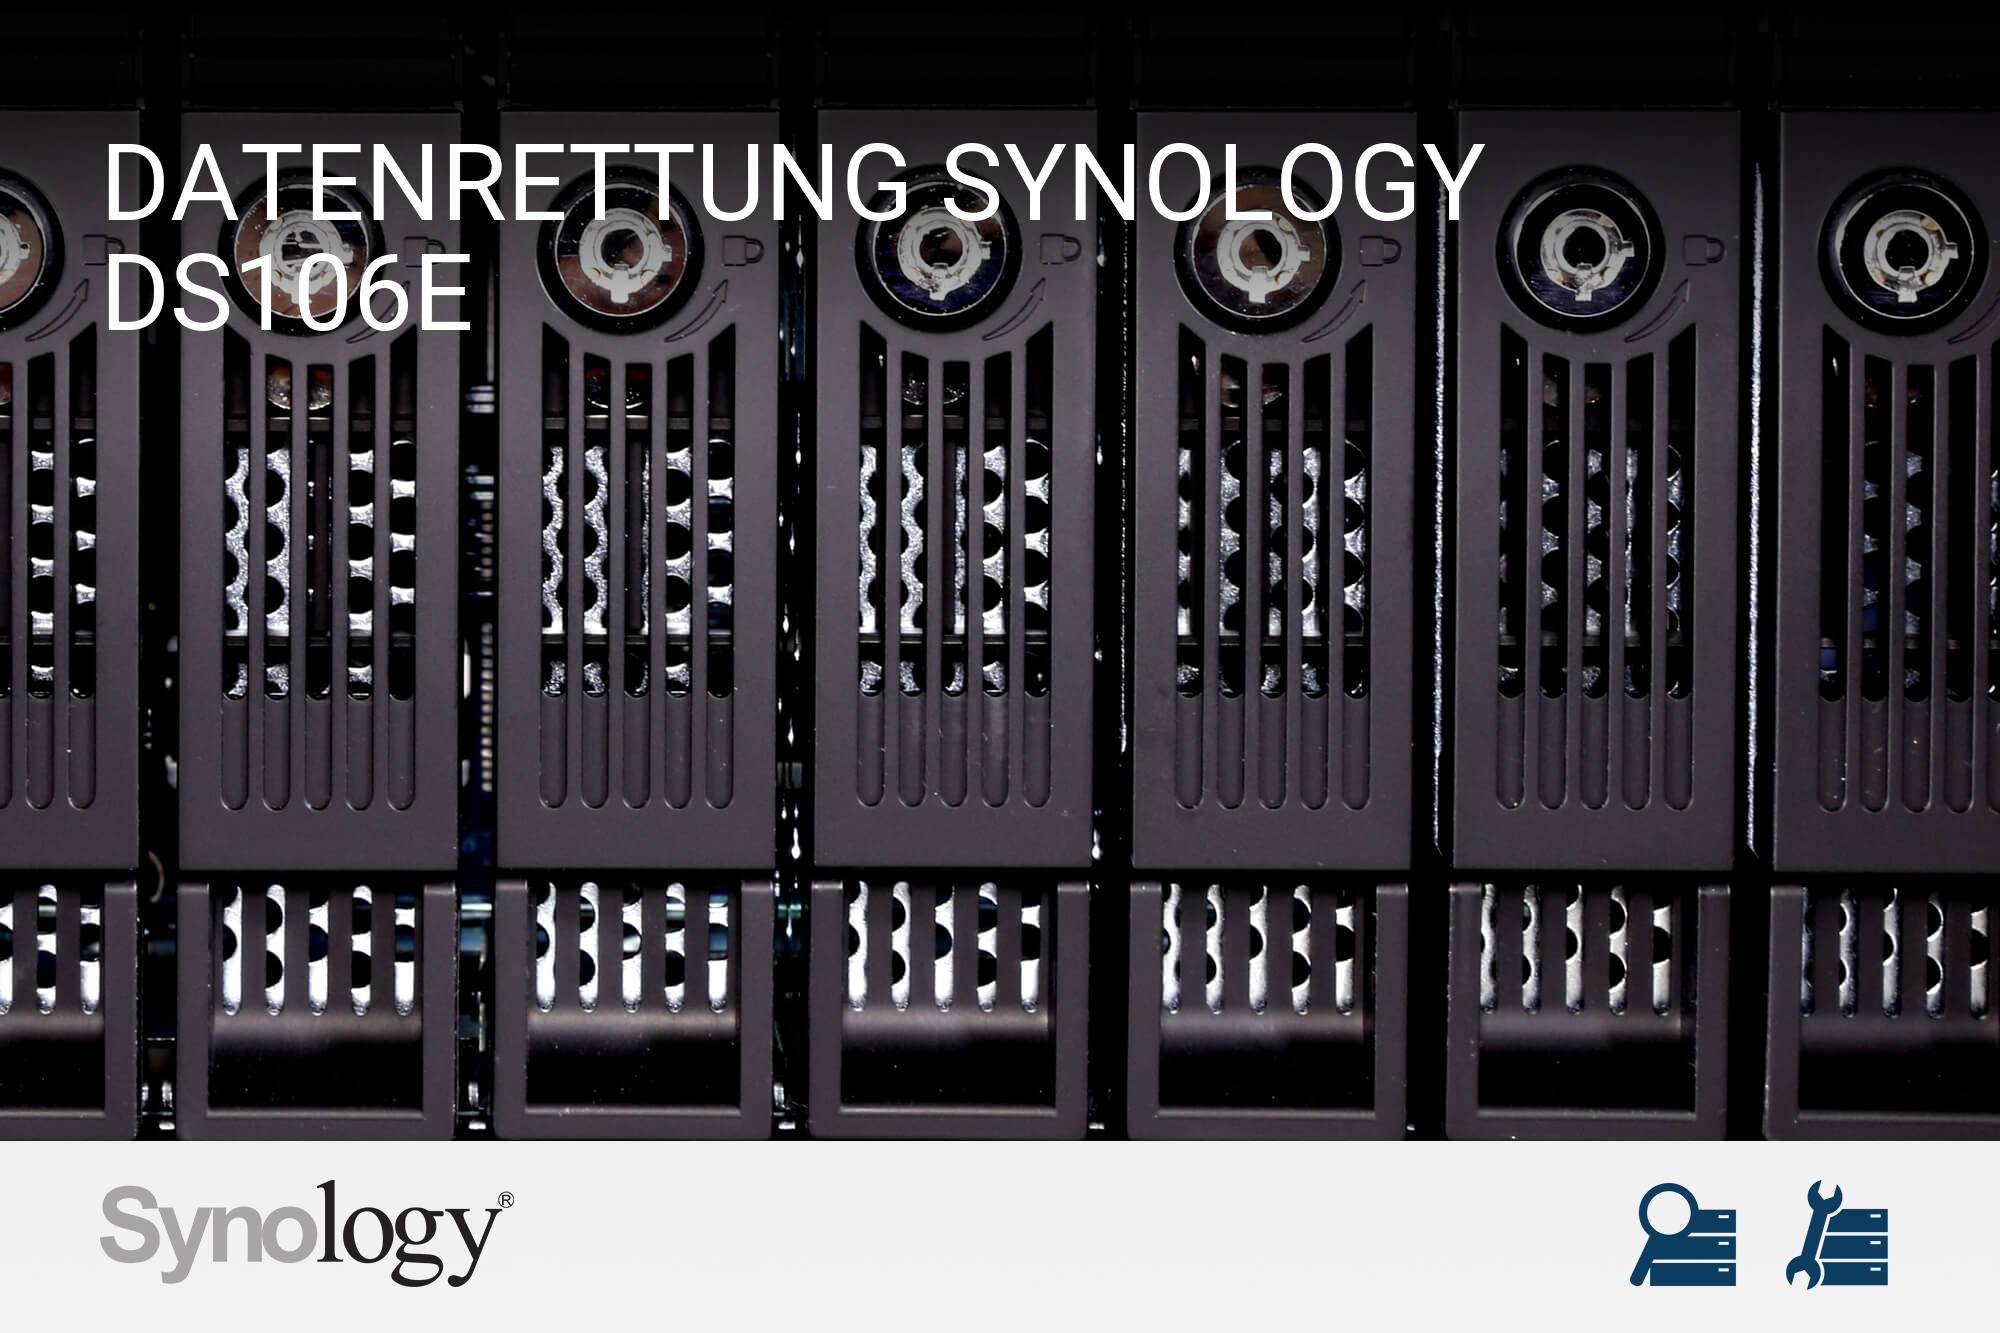 Synology DS106e